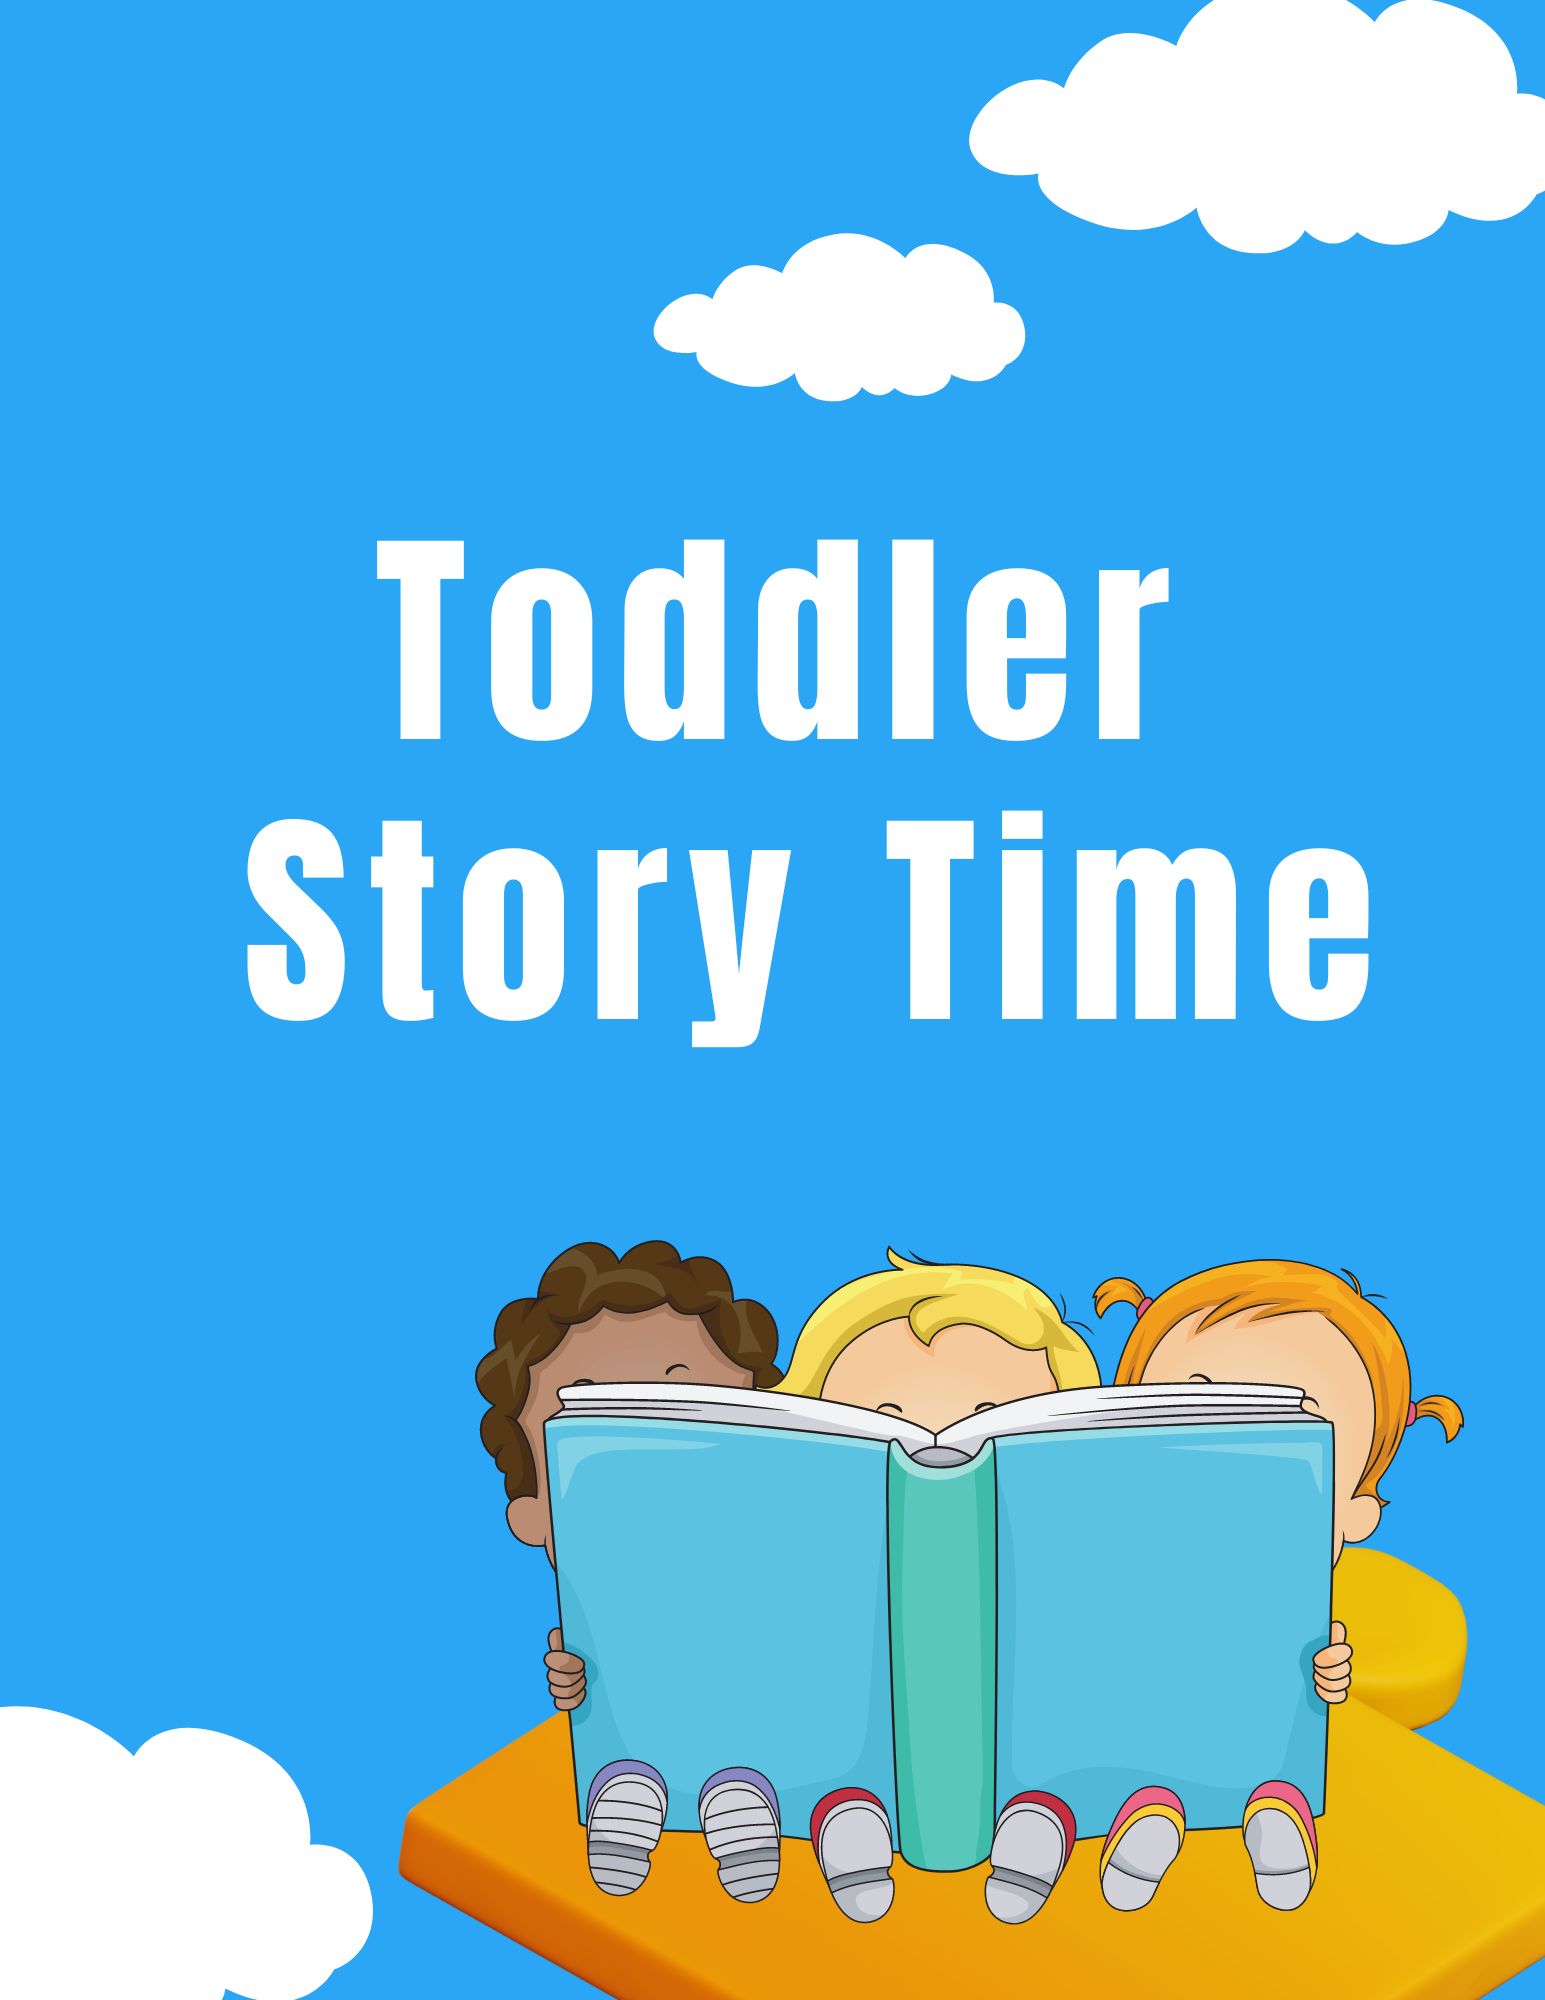 Toddler Story Time on blue backgroun with three children behind a big book on bottom right